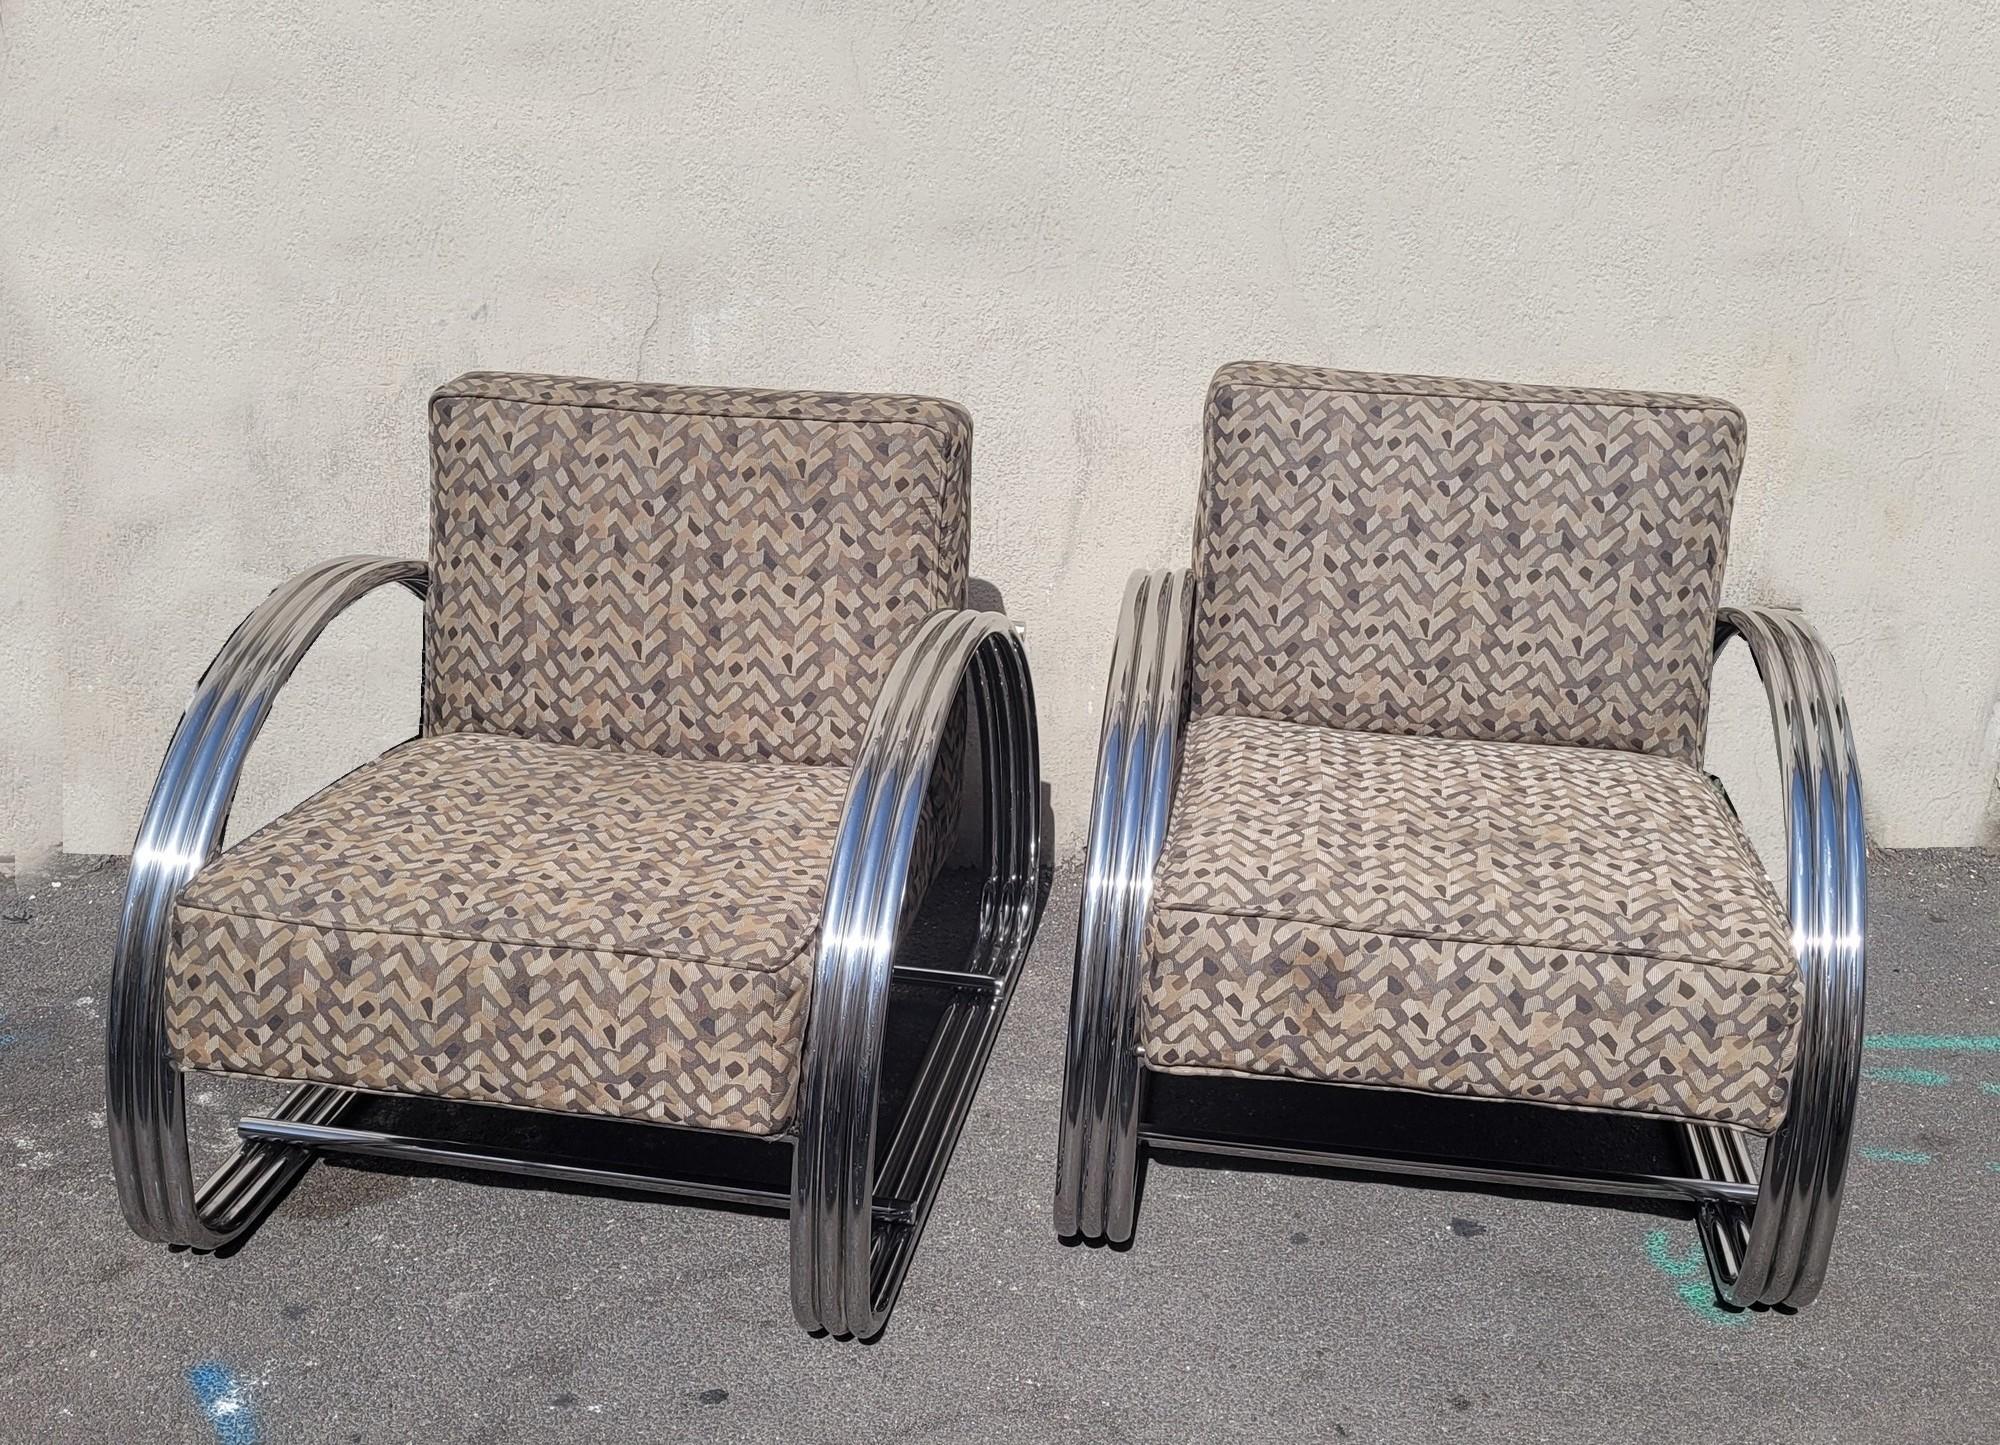 Pair of large chrome armchairs, with rounded tubes, in the art deco style; model by the designer Ralph Lauren

Original fabrics (traces of use)

Good general condition

Editions from the end of the 80s

Height 75 cm
96 x76cm